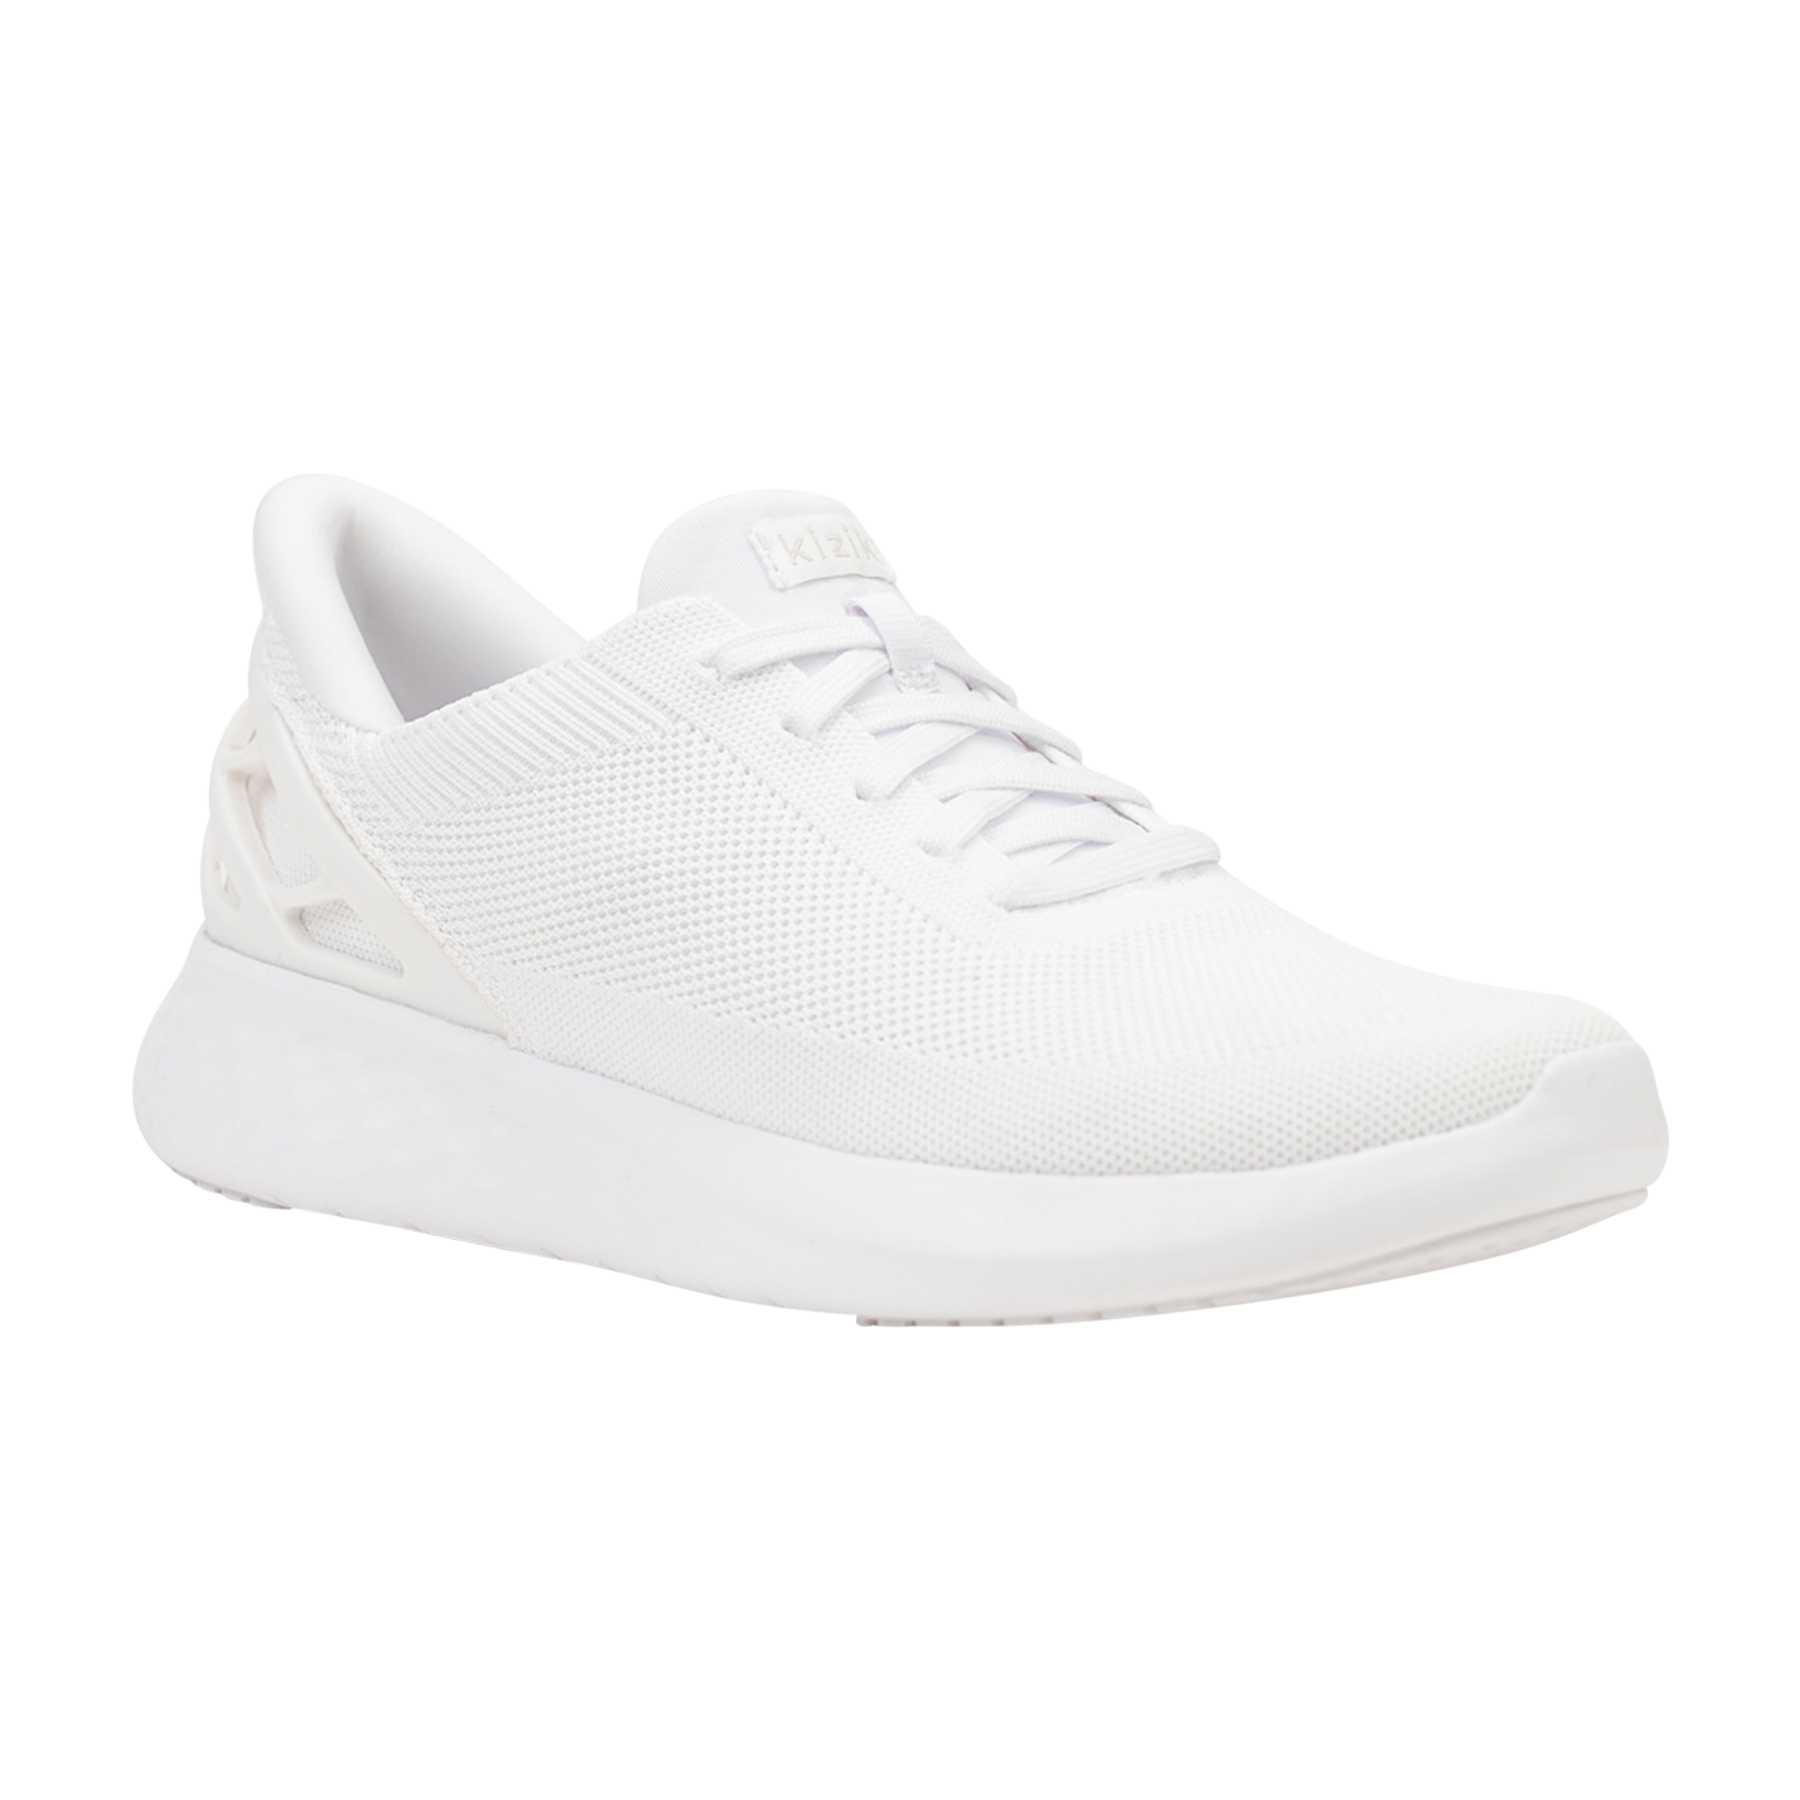 Real Sneakers 👟 on Twitter  White sneakers women, Sneakers fashion, White  sneakers